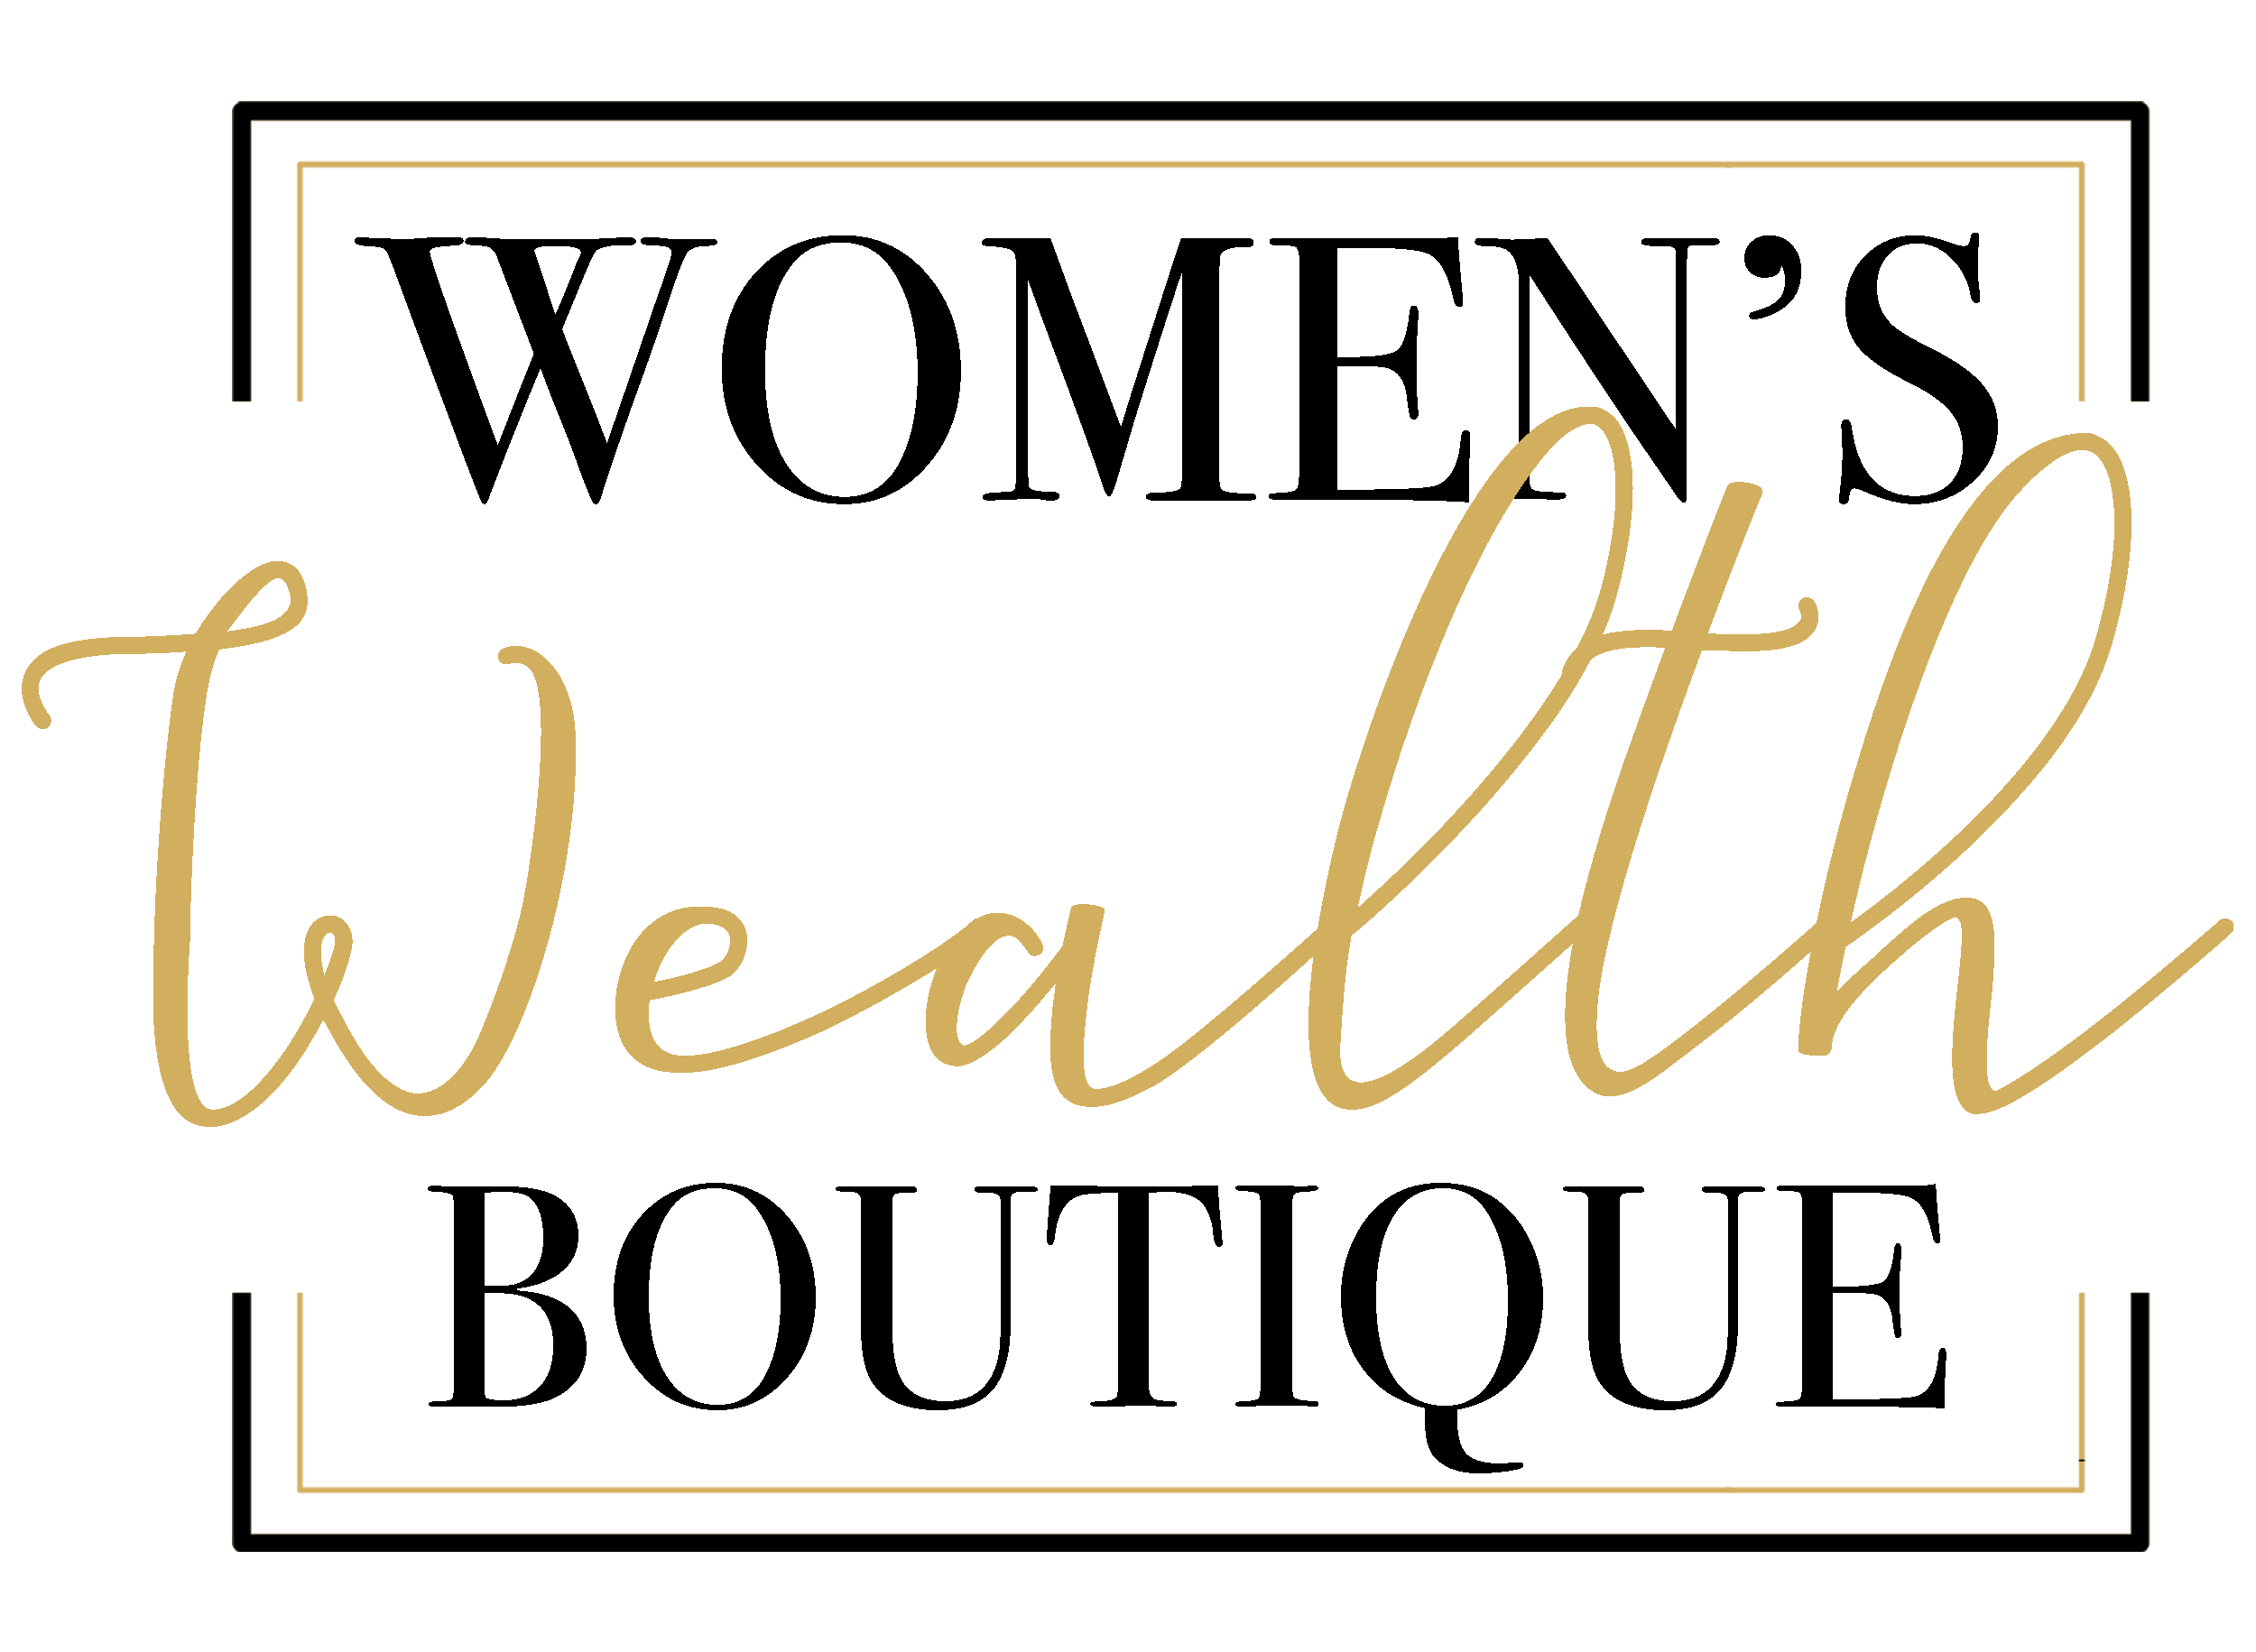 The founder of Women's Wealth Boutique will now be expanding their women-led team by onboarding more female financial advisors